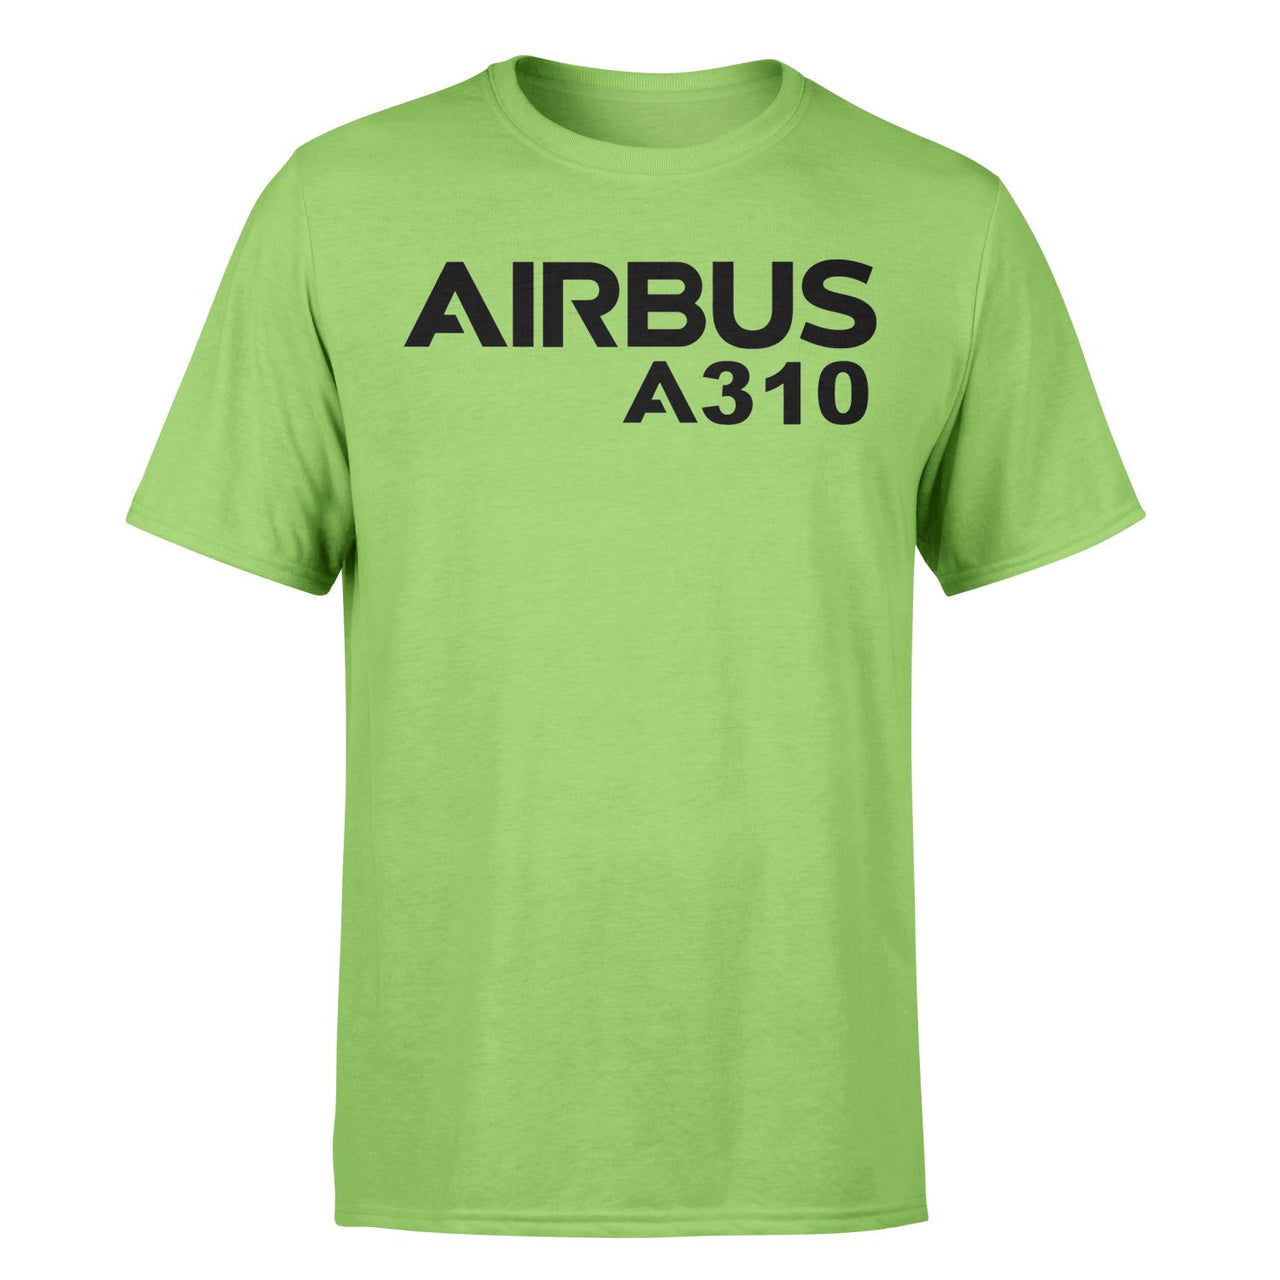 Airbus A310 & Text Designed T-Shirts